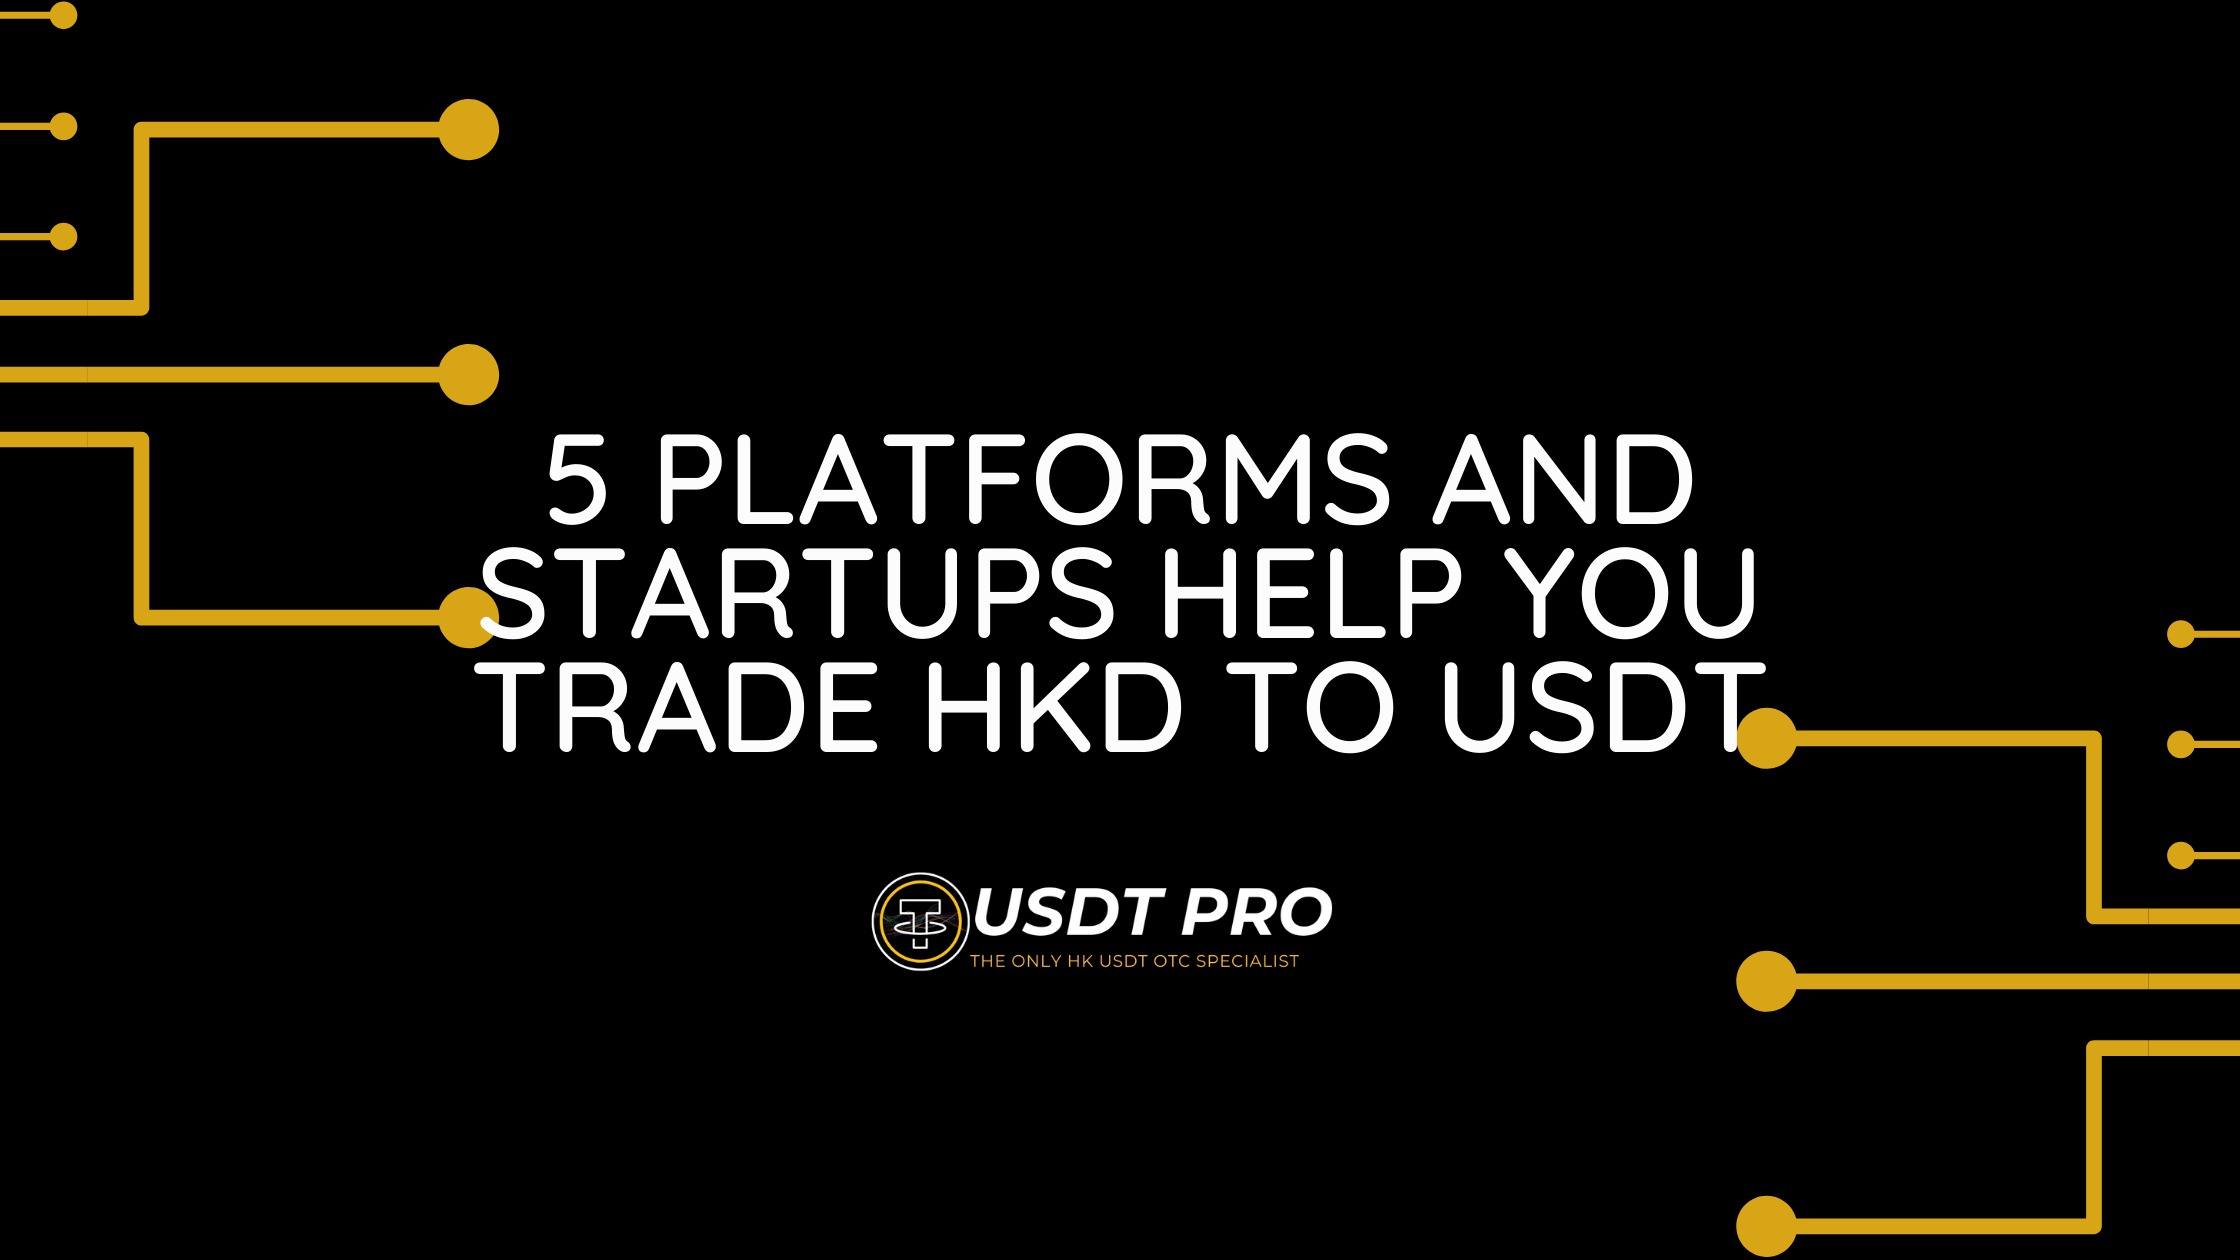 Feature image of 5 Platforms and startups help you trade HKD to USDT